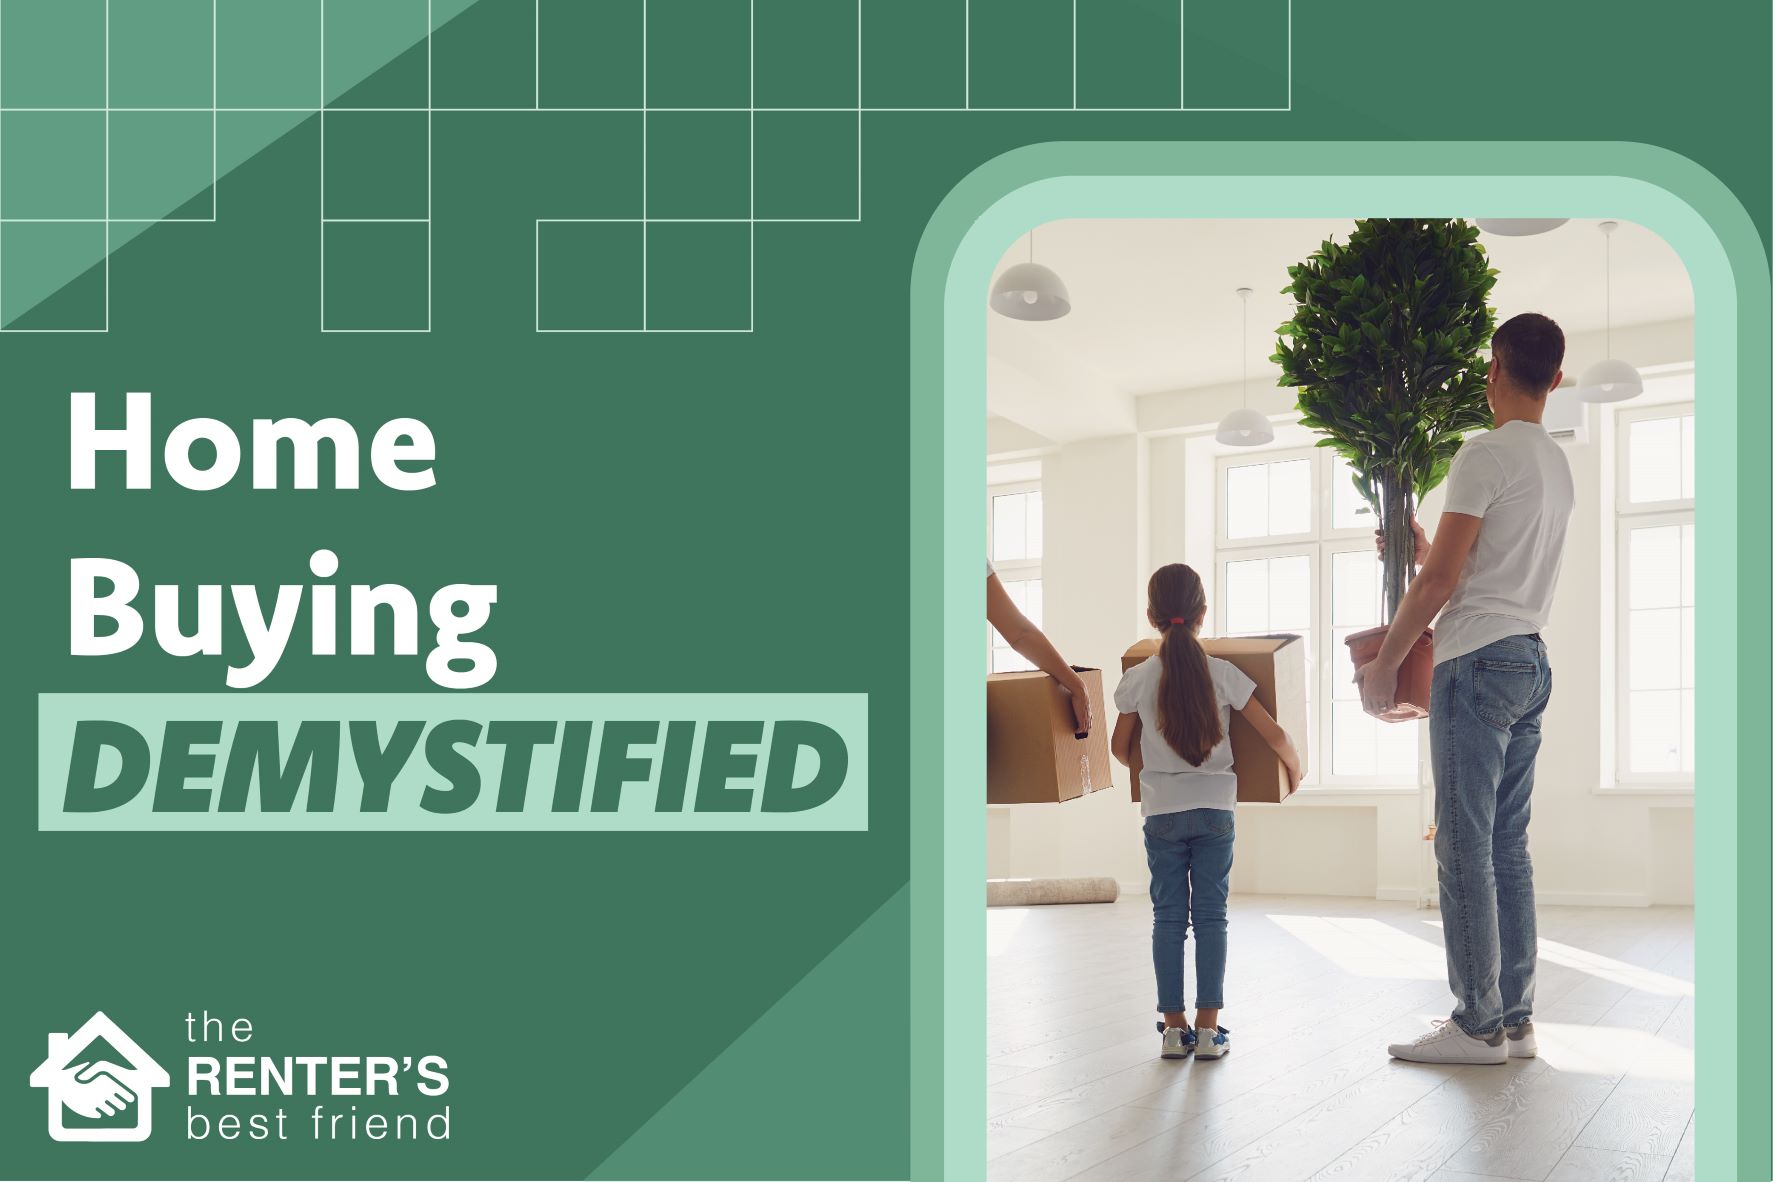 Home buying process explained and demystified